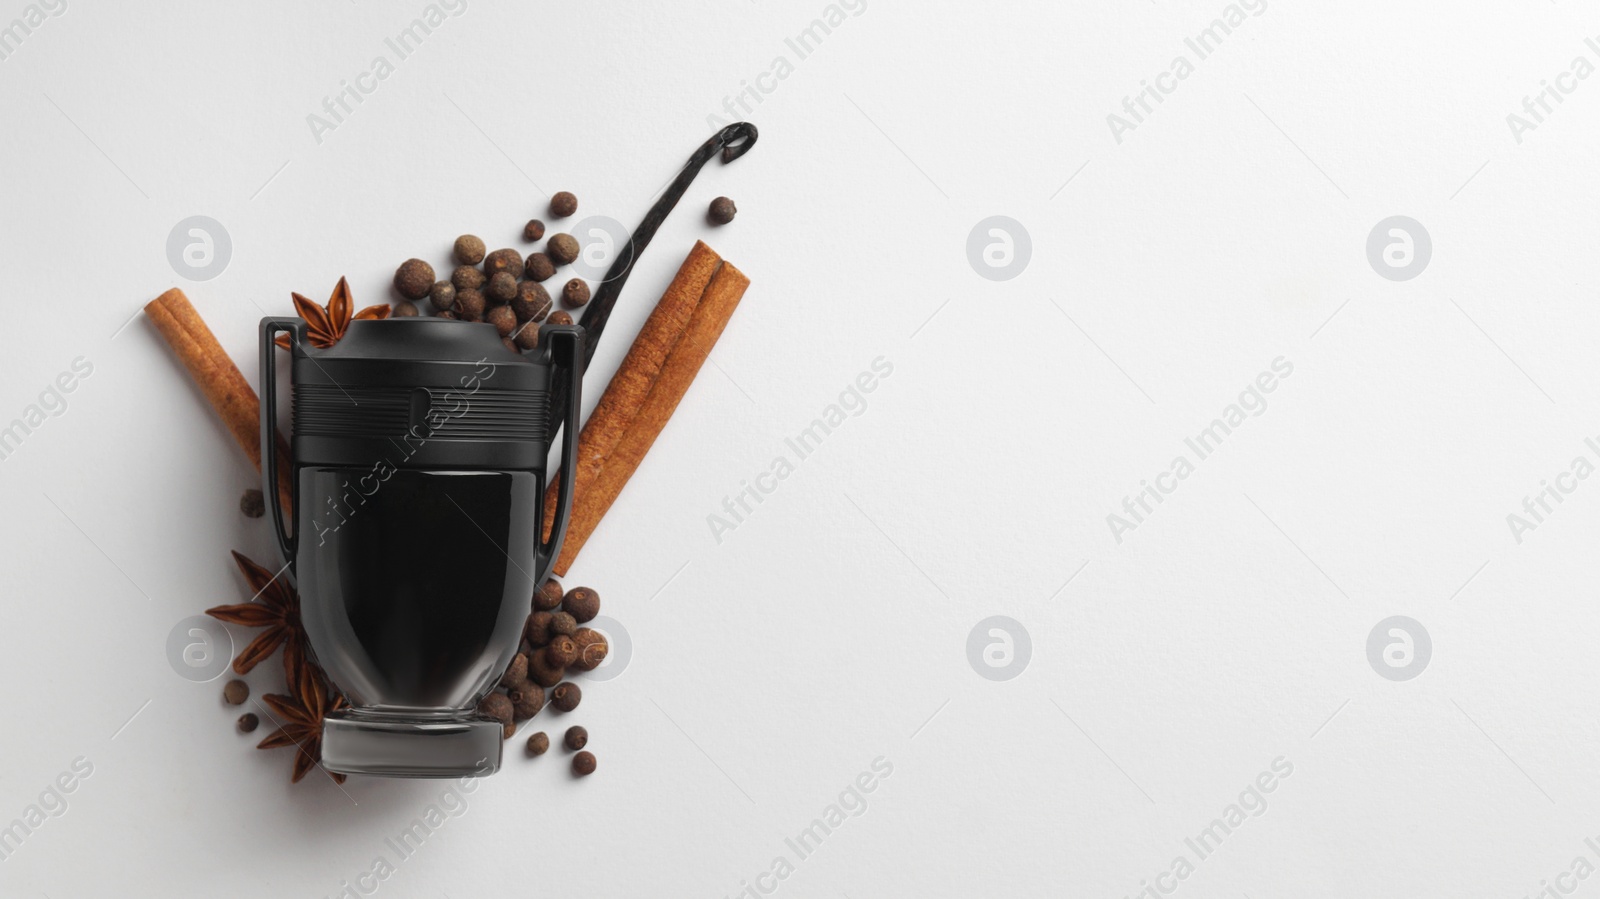 Photo of Bottle of perfume surrounded by different spices on white background, top view. Space for text